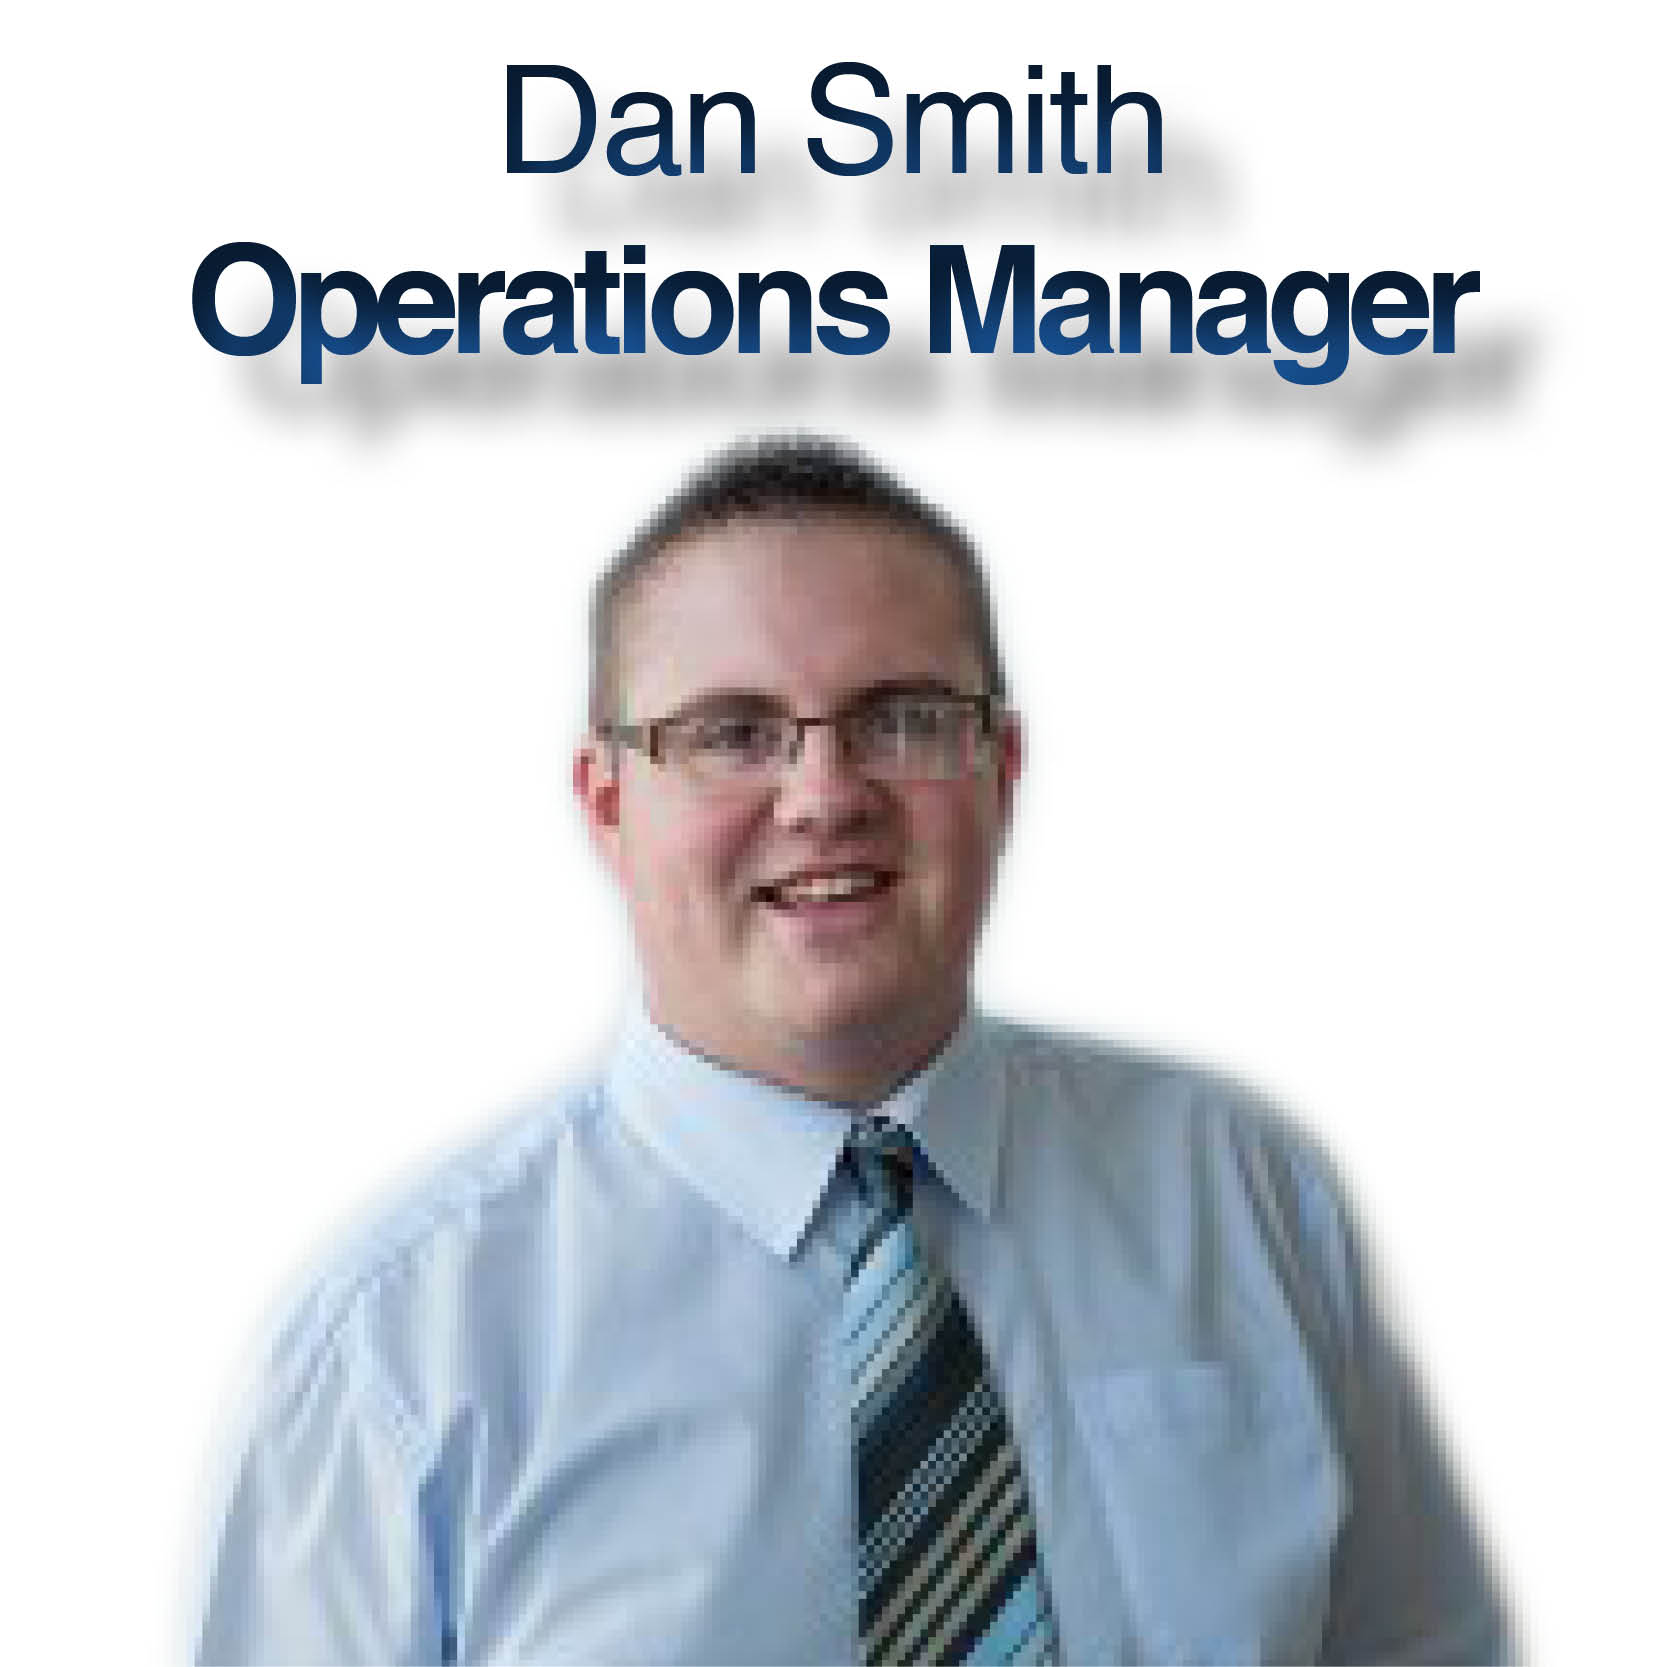 Engineer to Operations Manager - Dan Smith